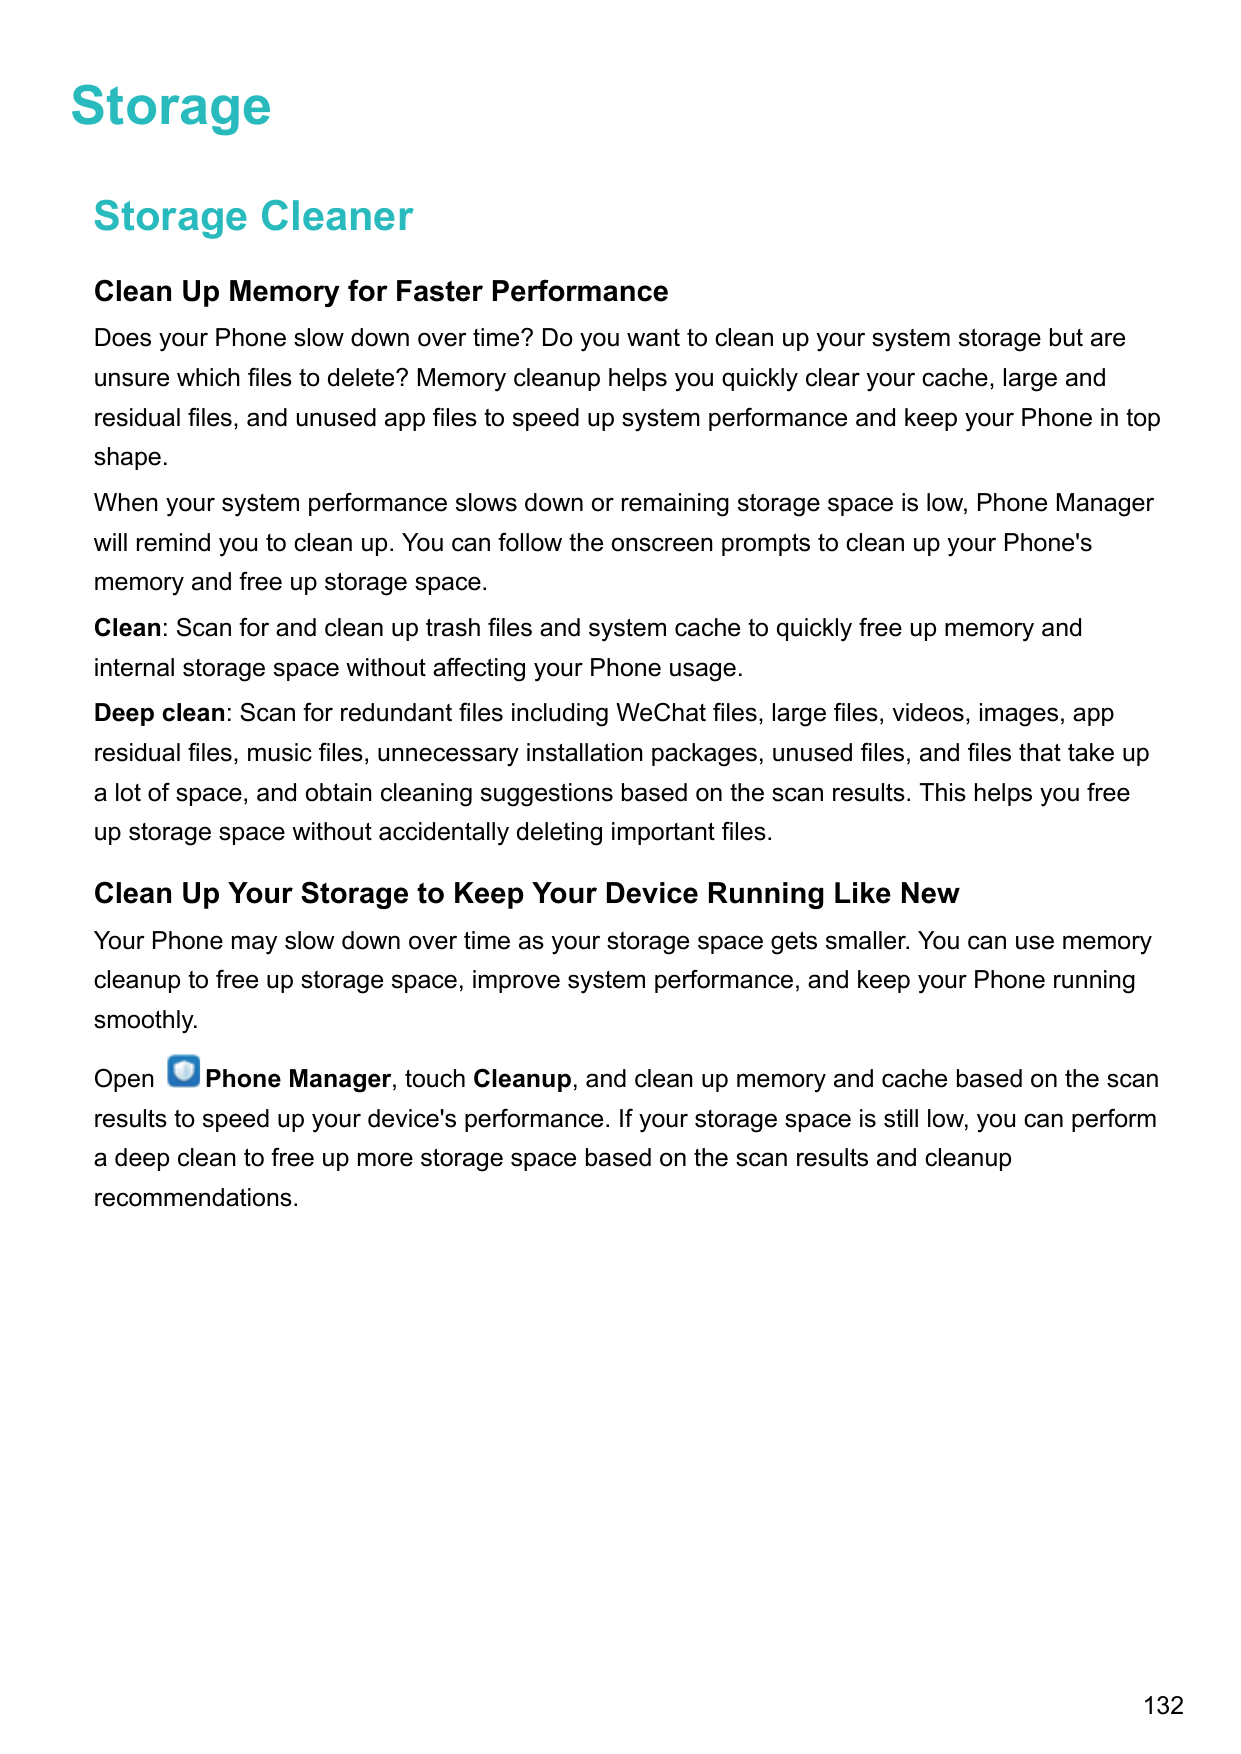 StorageStorage CleanerClean Up Memory for Faster PerformanceDoes your Phone slow down over time? Do you want to clean up your sy